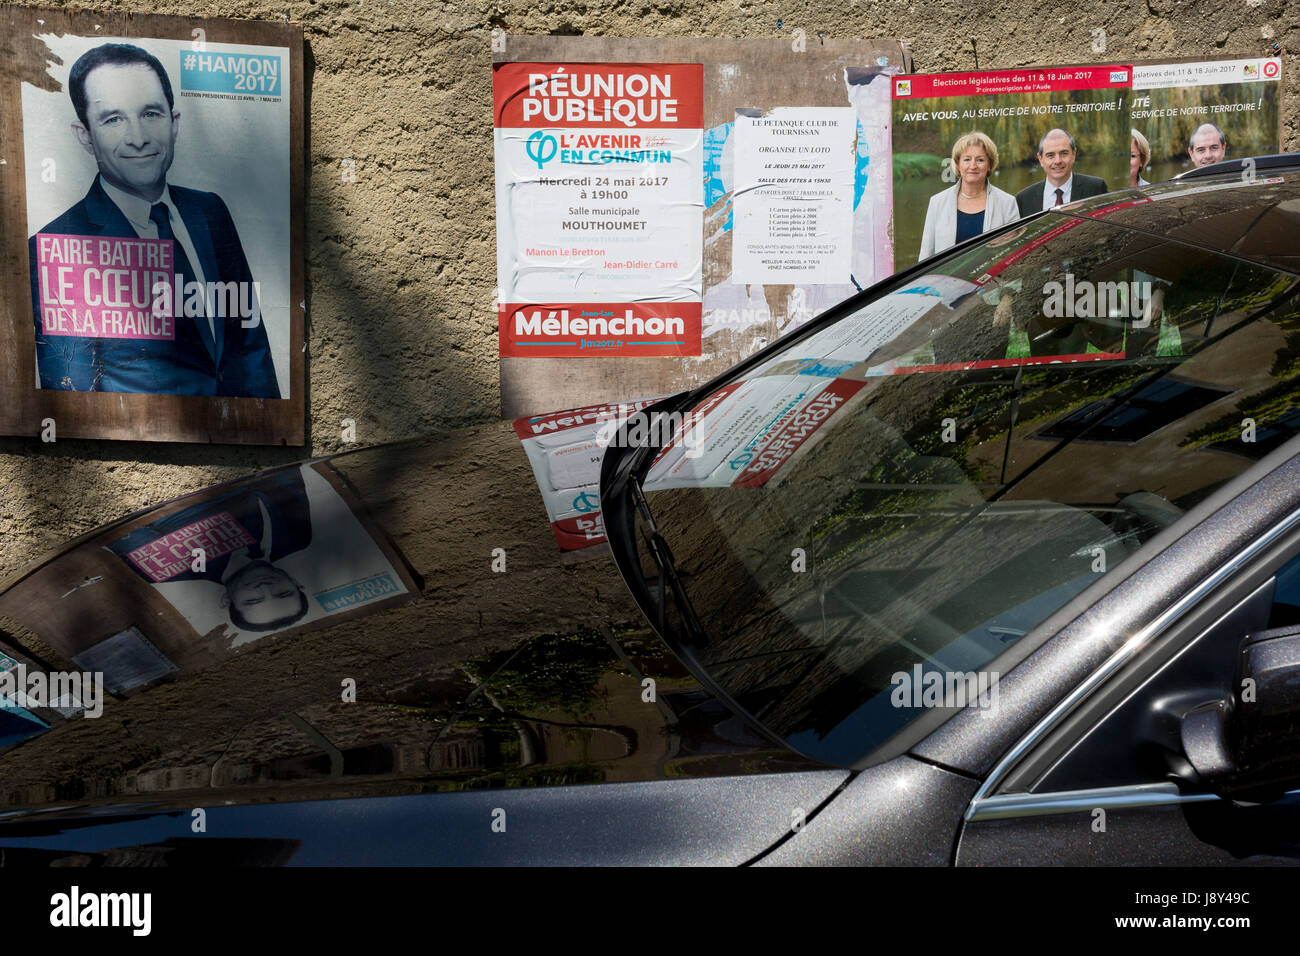 French Socialist party presidential candidate Benoît Hamon poster on 26th May, 2017, in Termes, Languedoc-Rousillon, south of France Stock Photo